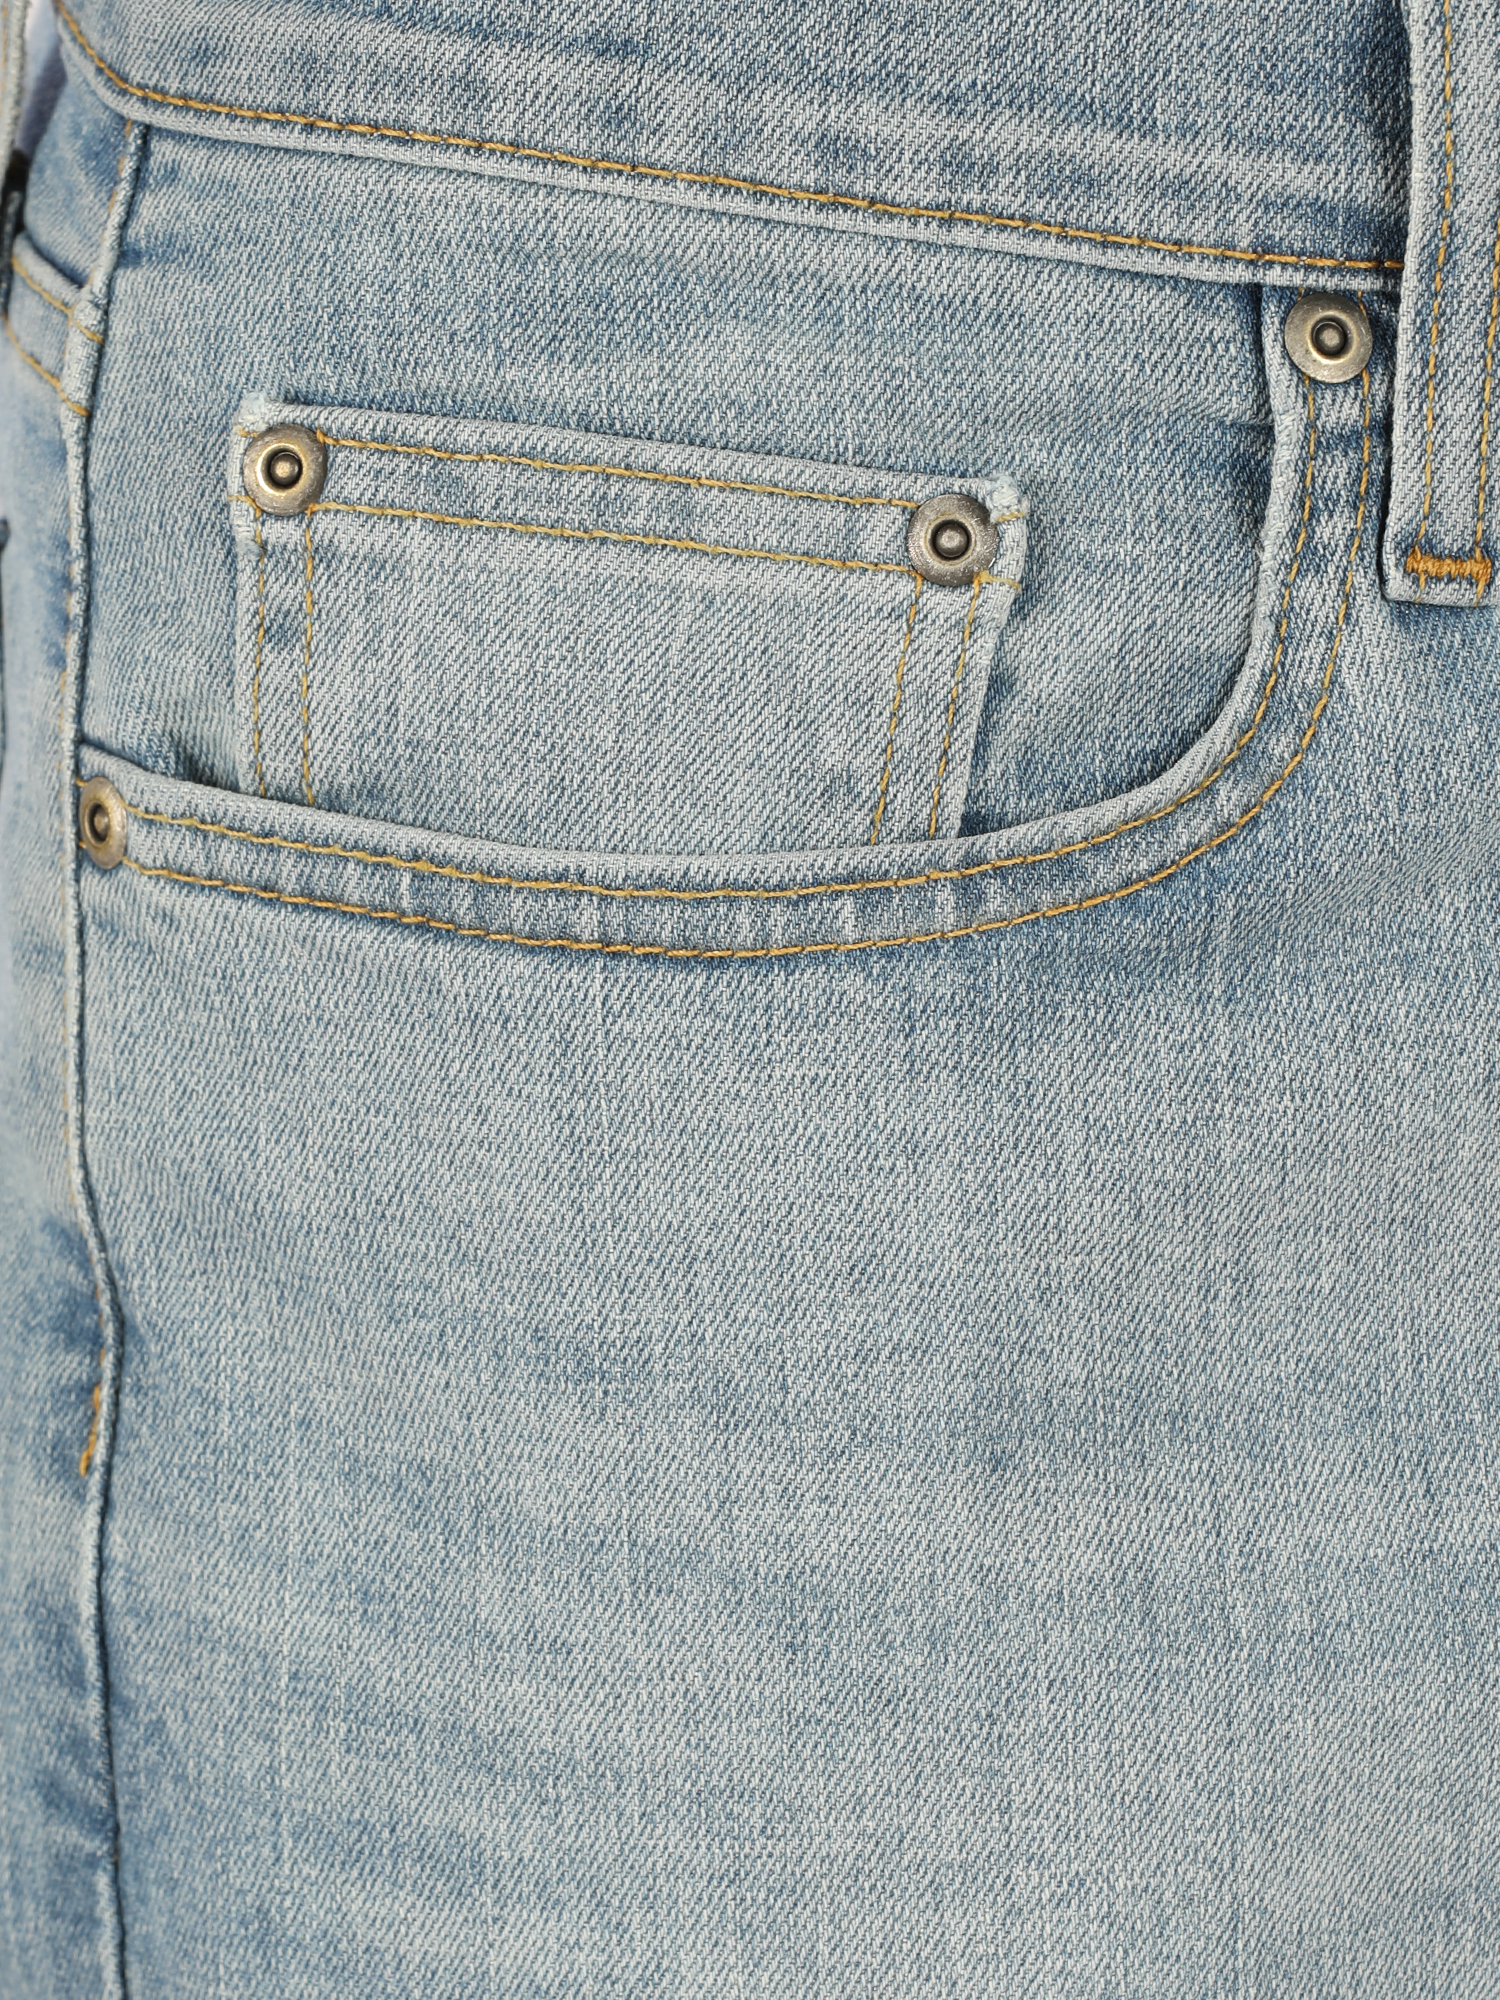 George Men's Bootcut Jeans - image 4 of 5